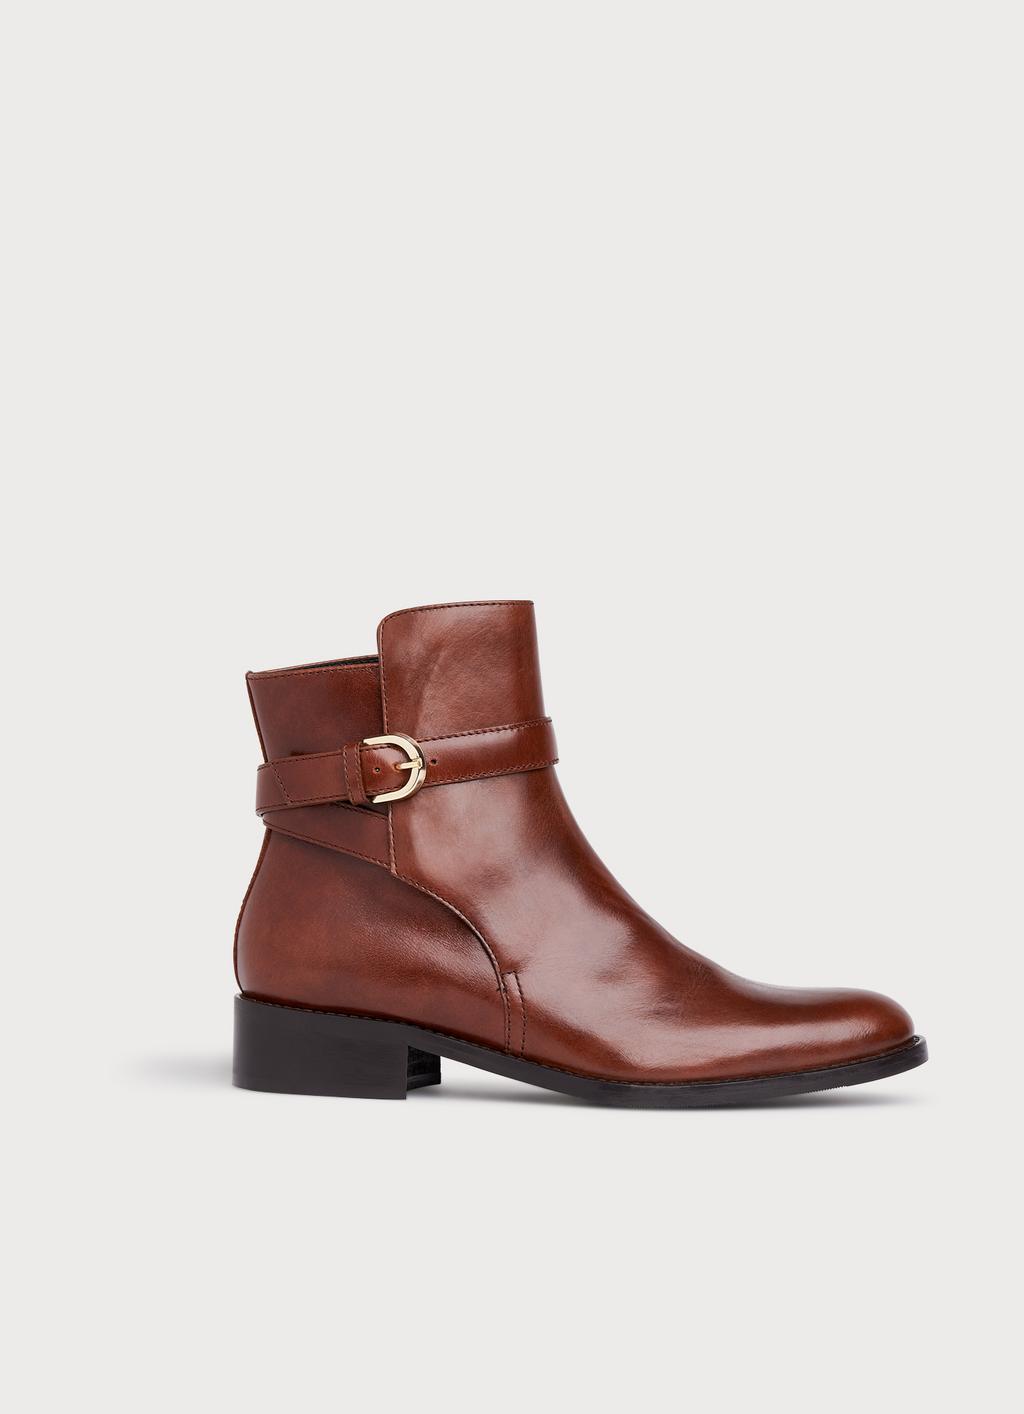 Annie Brown Leather Flat Ankle Boots